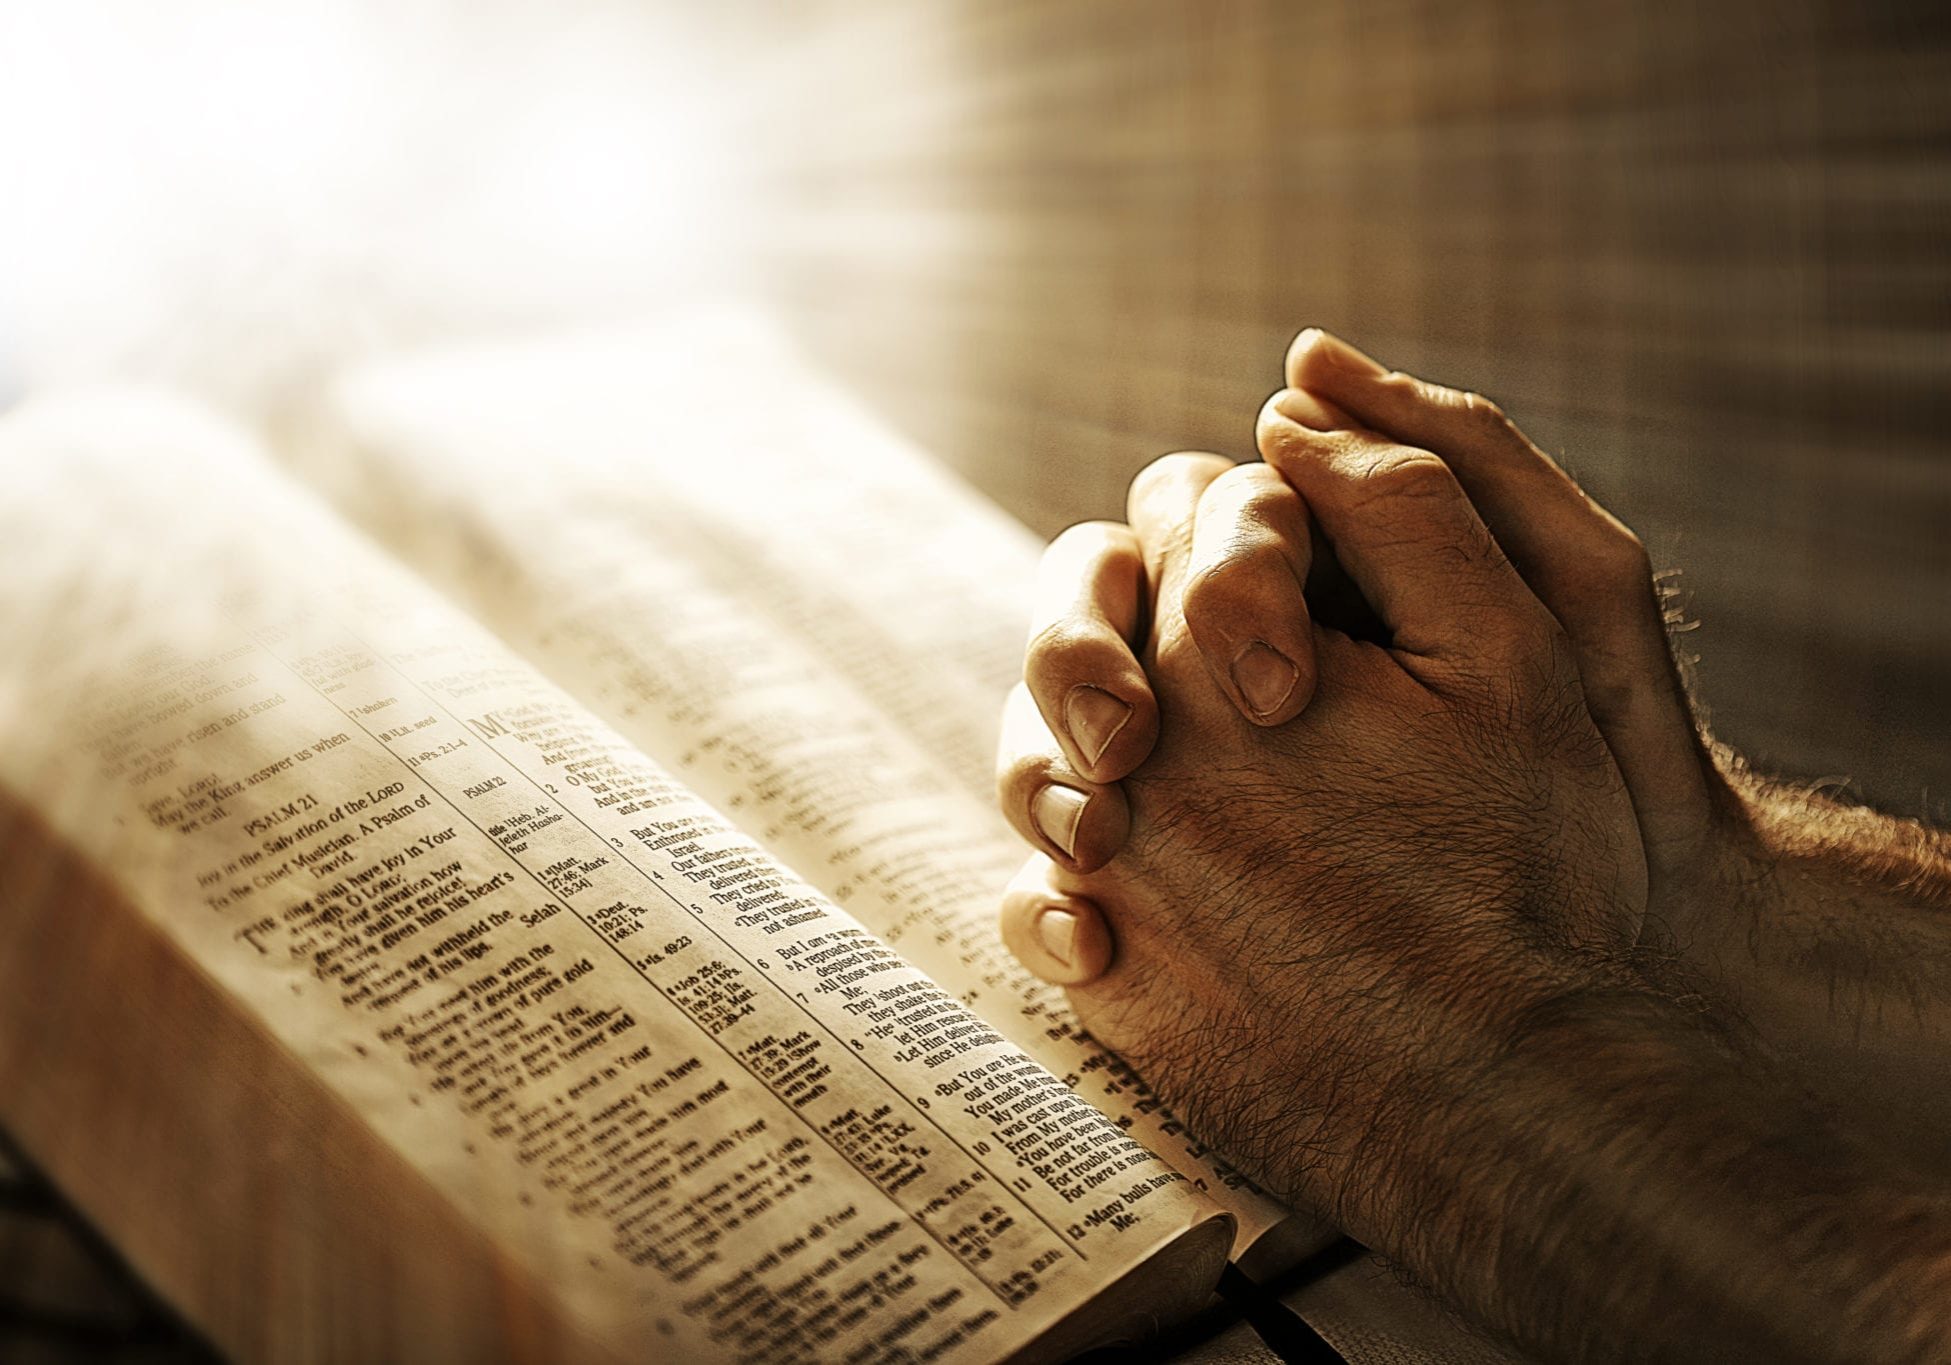 Two hands are in prayer while resting on the Bible